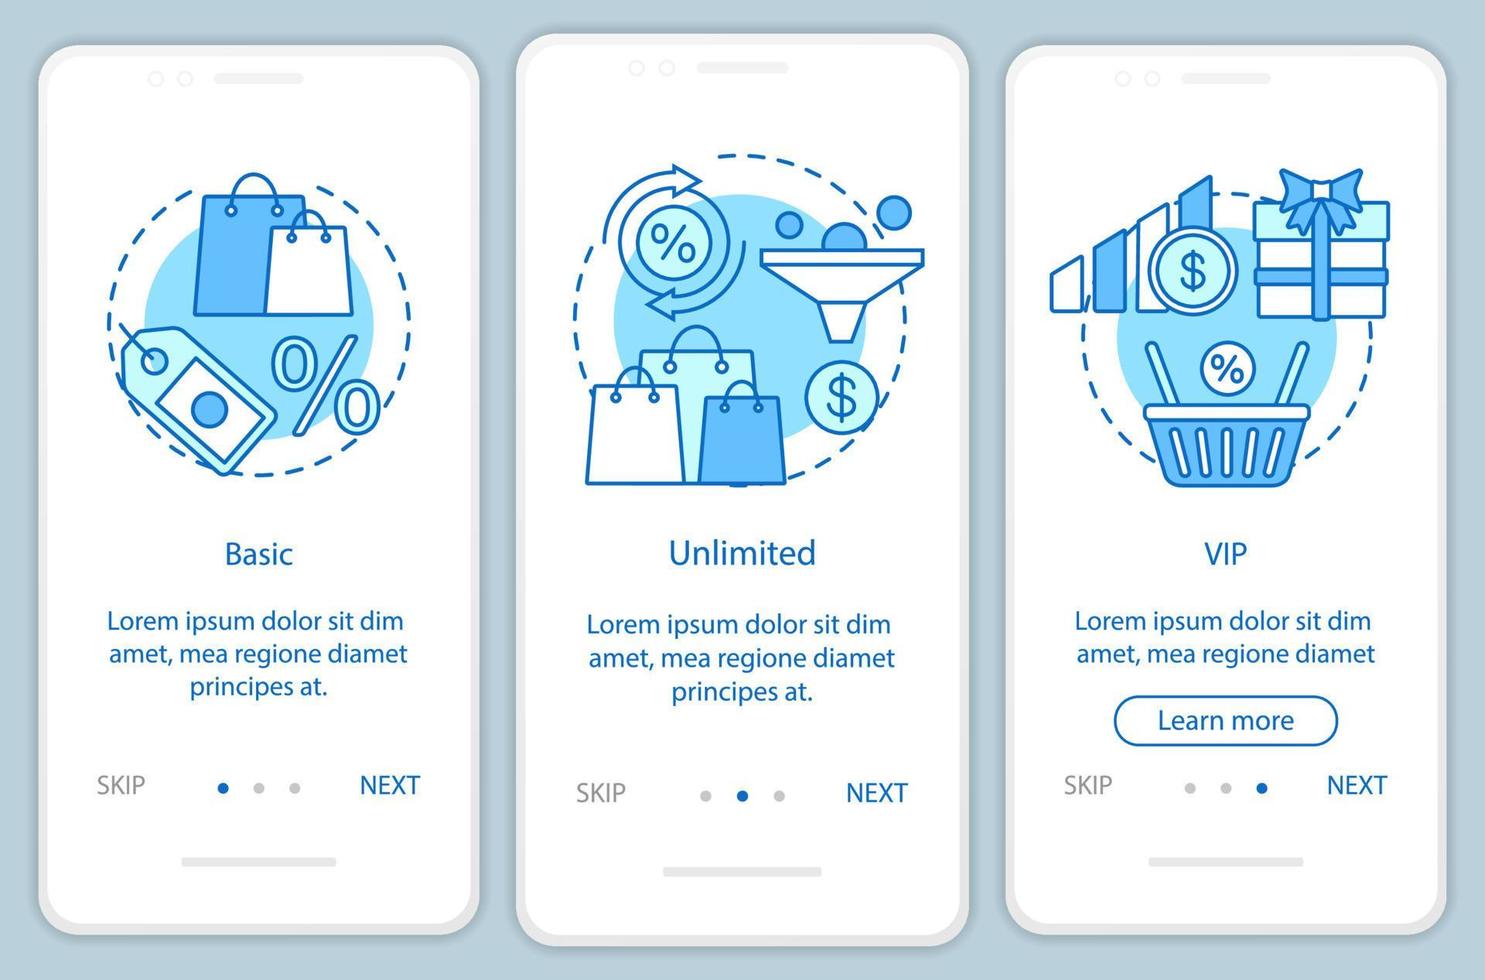 Discounts bonuses subscription onboarding mobile app page screen with linear concepts. Three walkthrough steps graphic instructions. Basic, VIP tariff. UX, UI, GUI vector template with illustrations